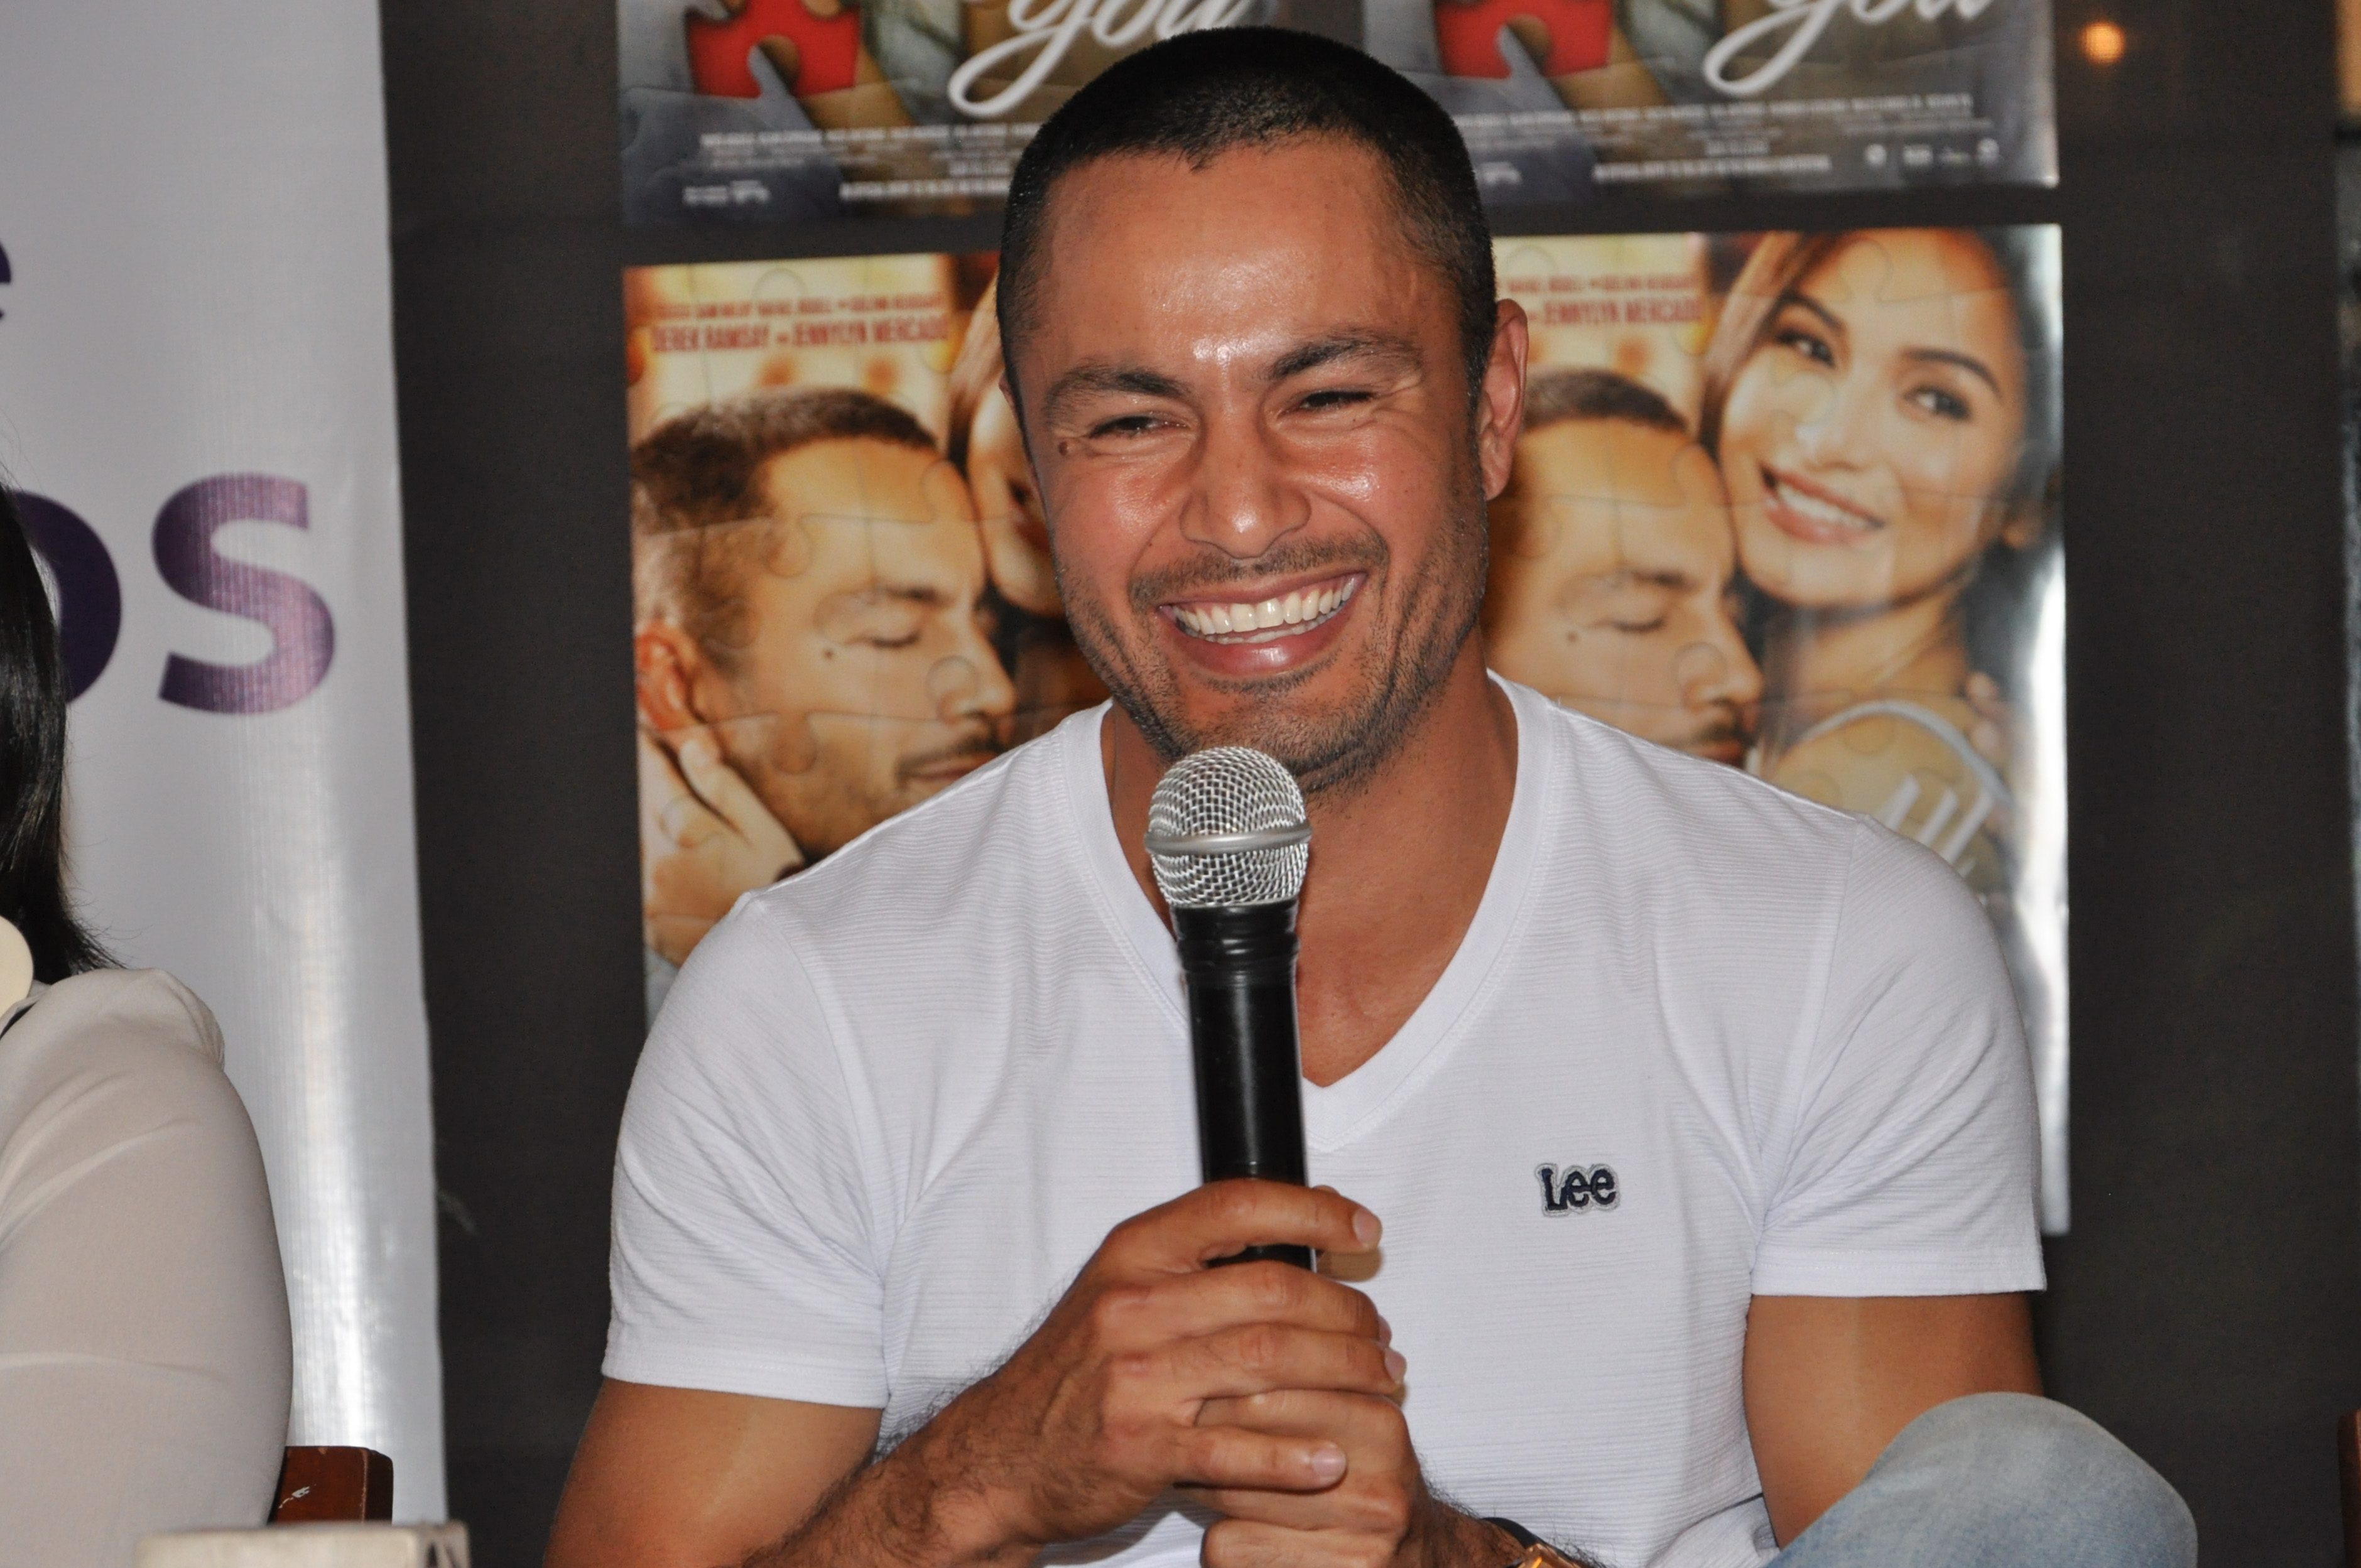 SETTLING DOWN SOON? Derek Ramsay says his girlfriend's daughter has also given him a peek into what could be their future as a family. 